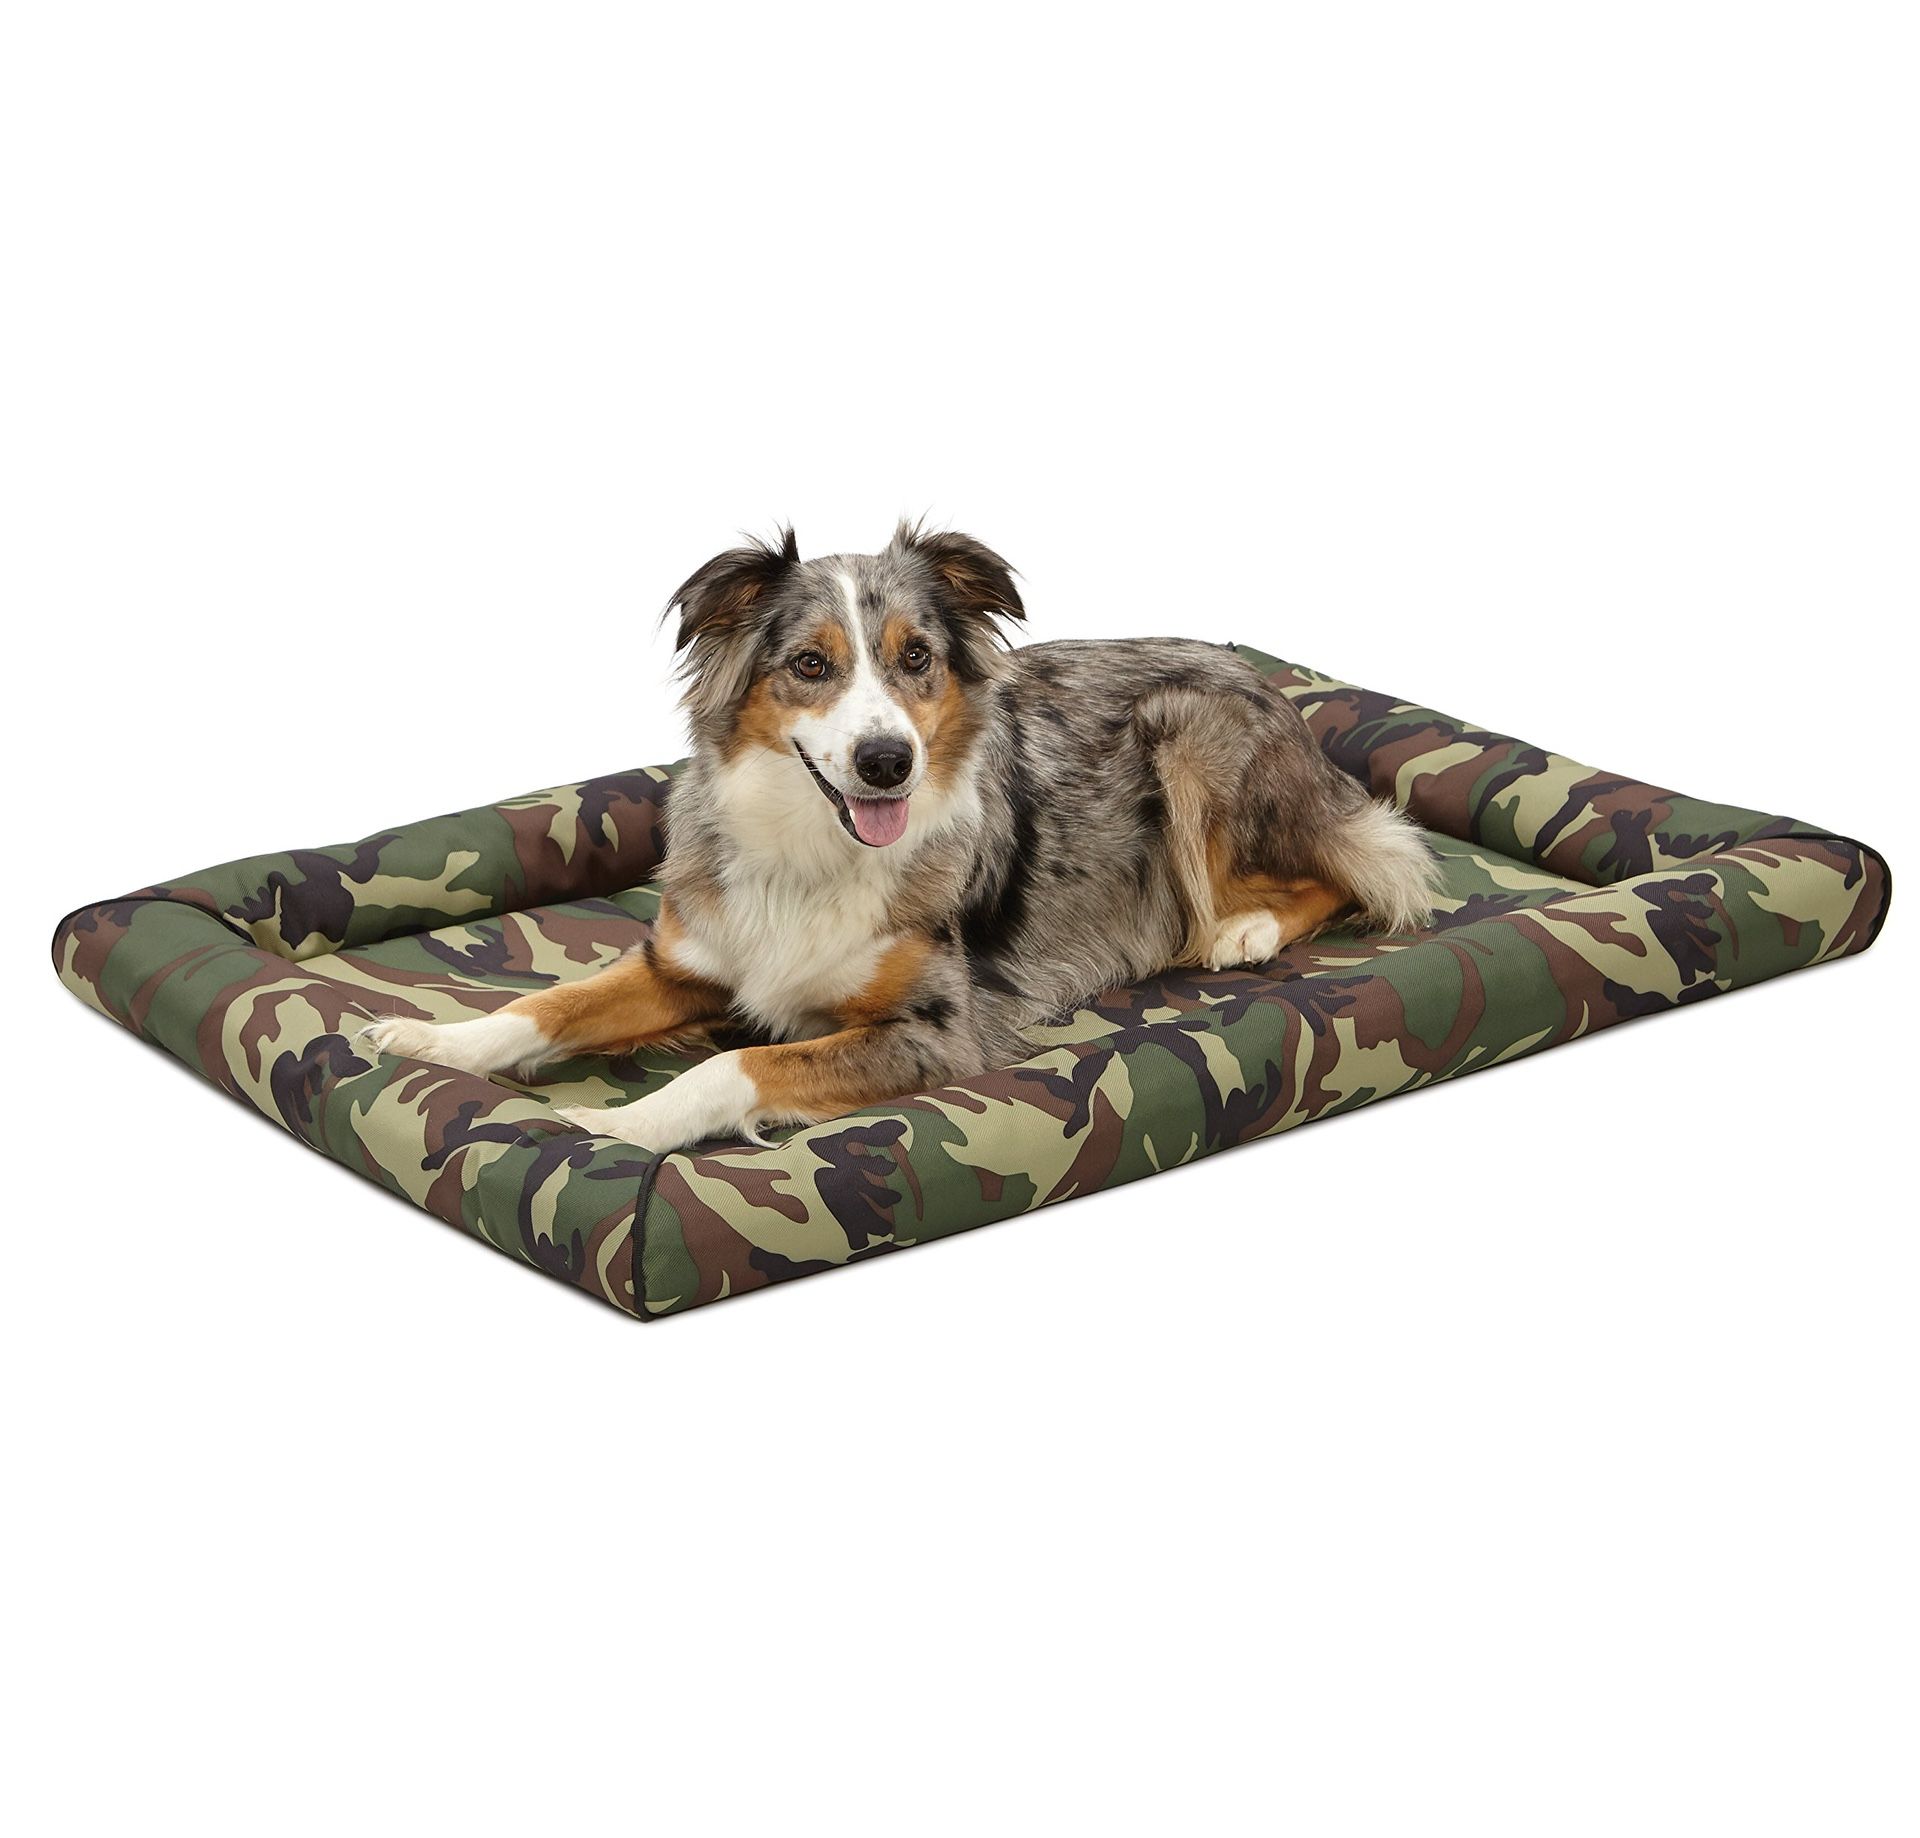 Maxx Dog Bed for Metal Dog Crates, 42-Inch, Camouflage 